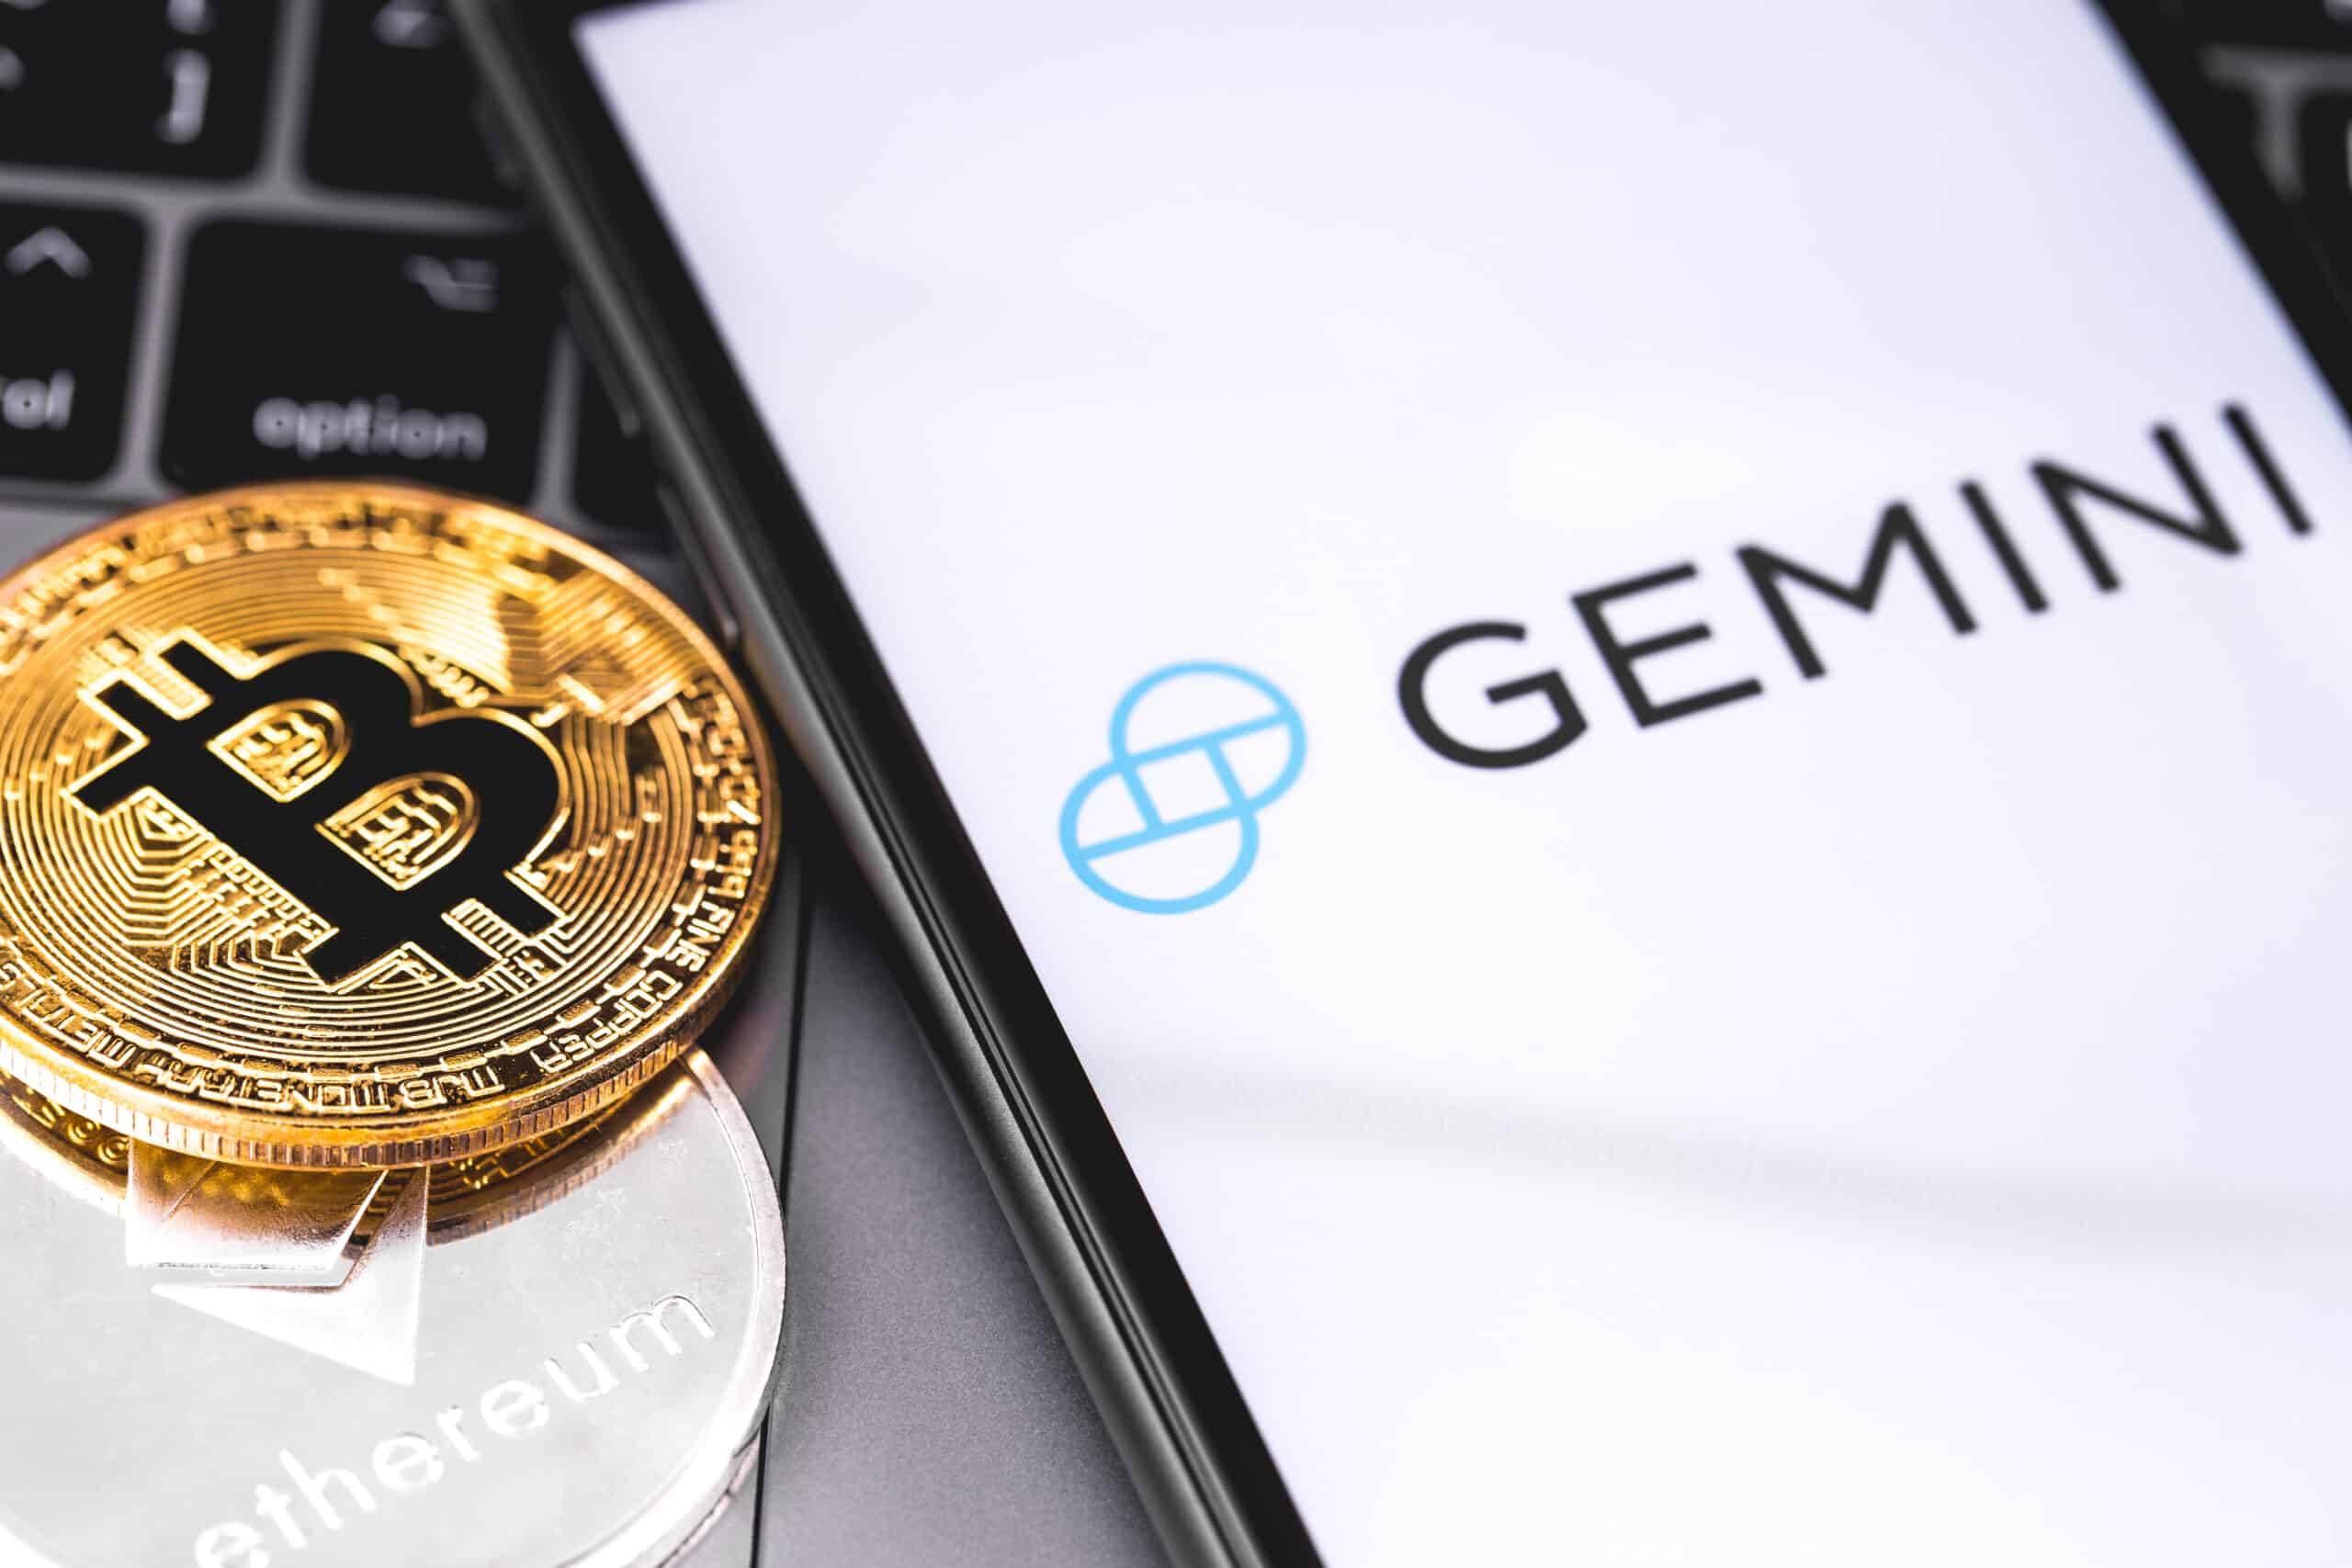 Crypto exchange Gemini says bankrupt Genesis moves to authorize sale of trust assets | Reuters